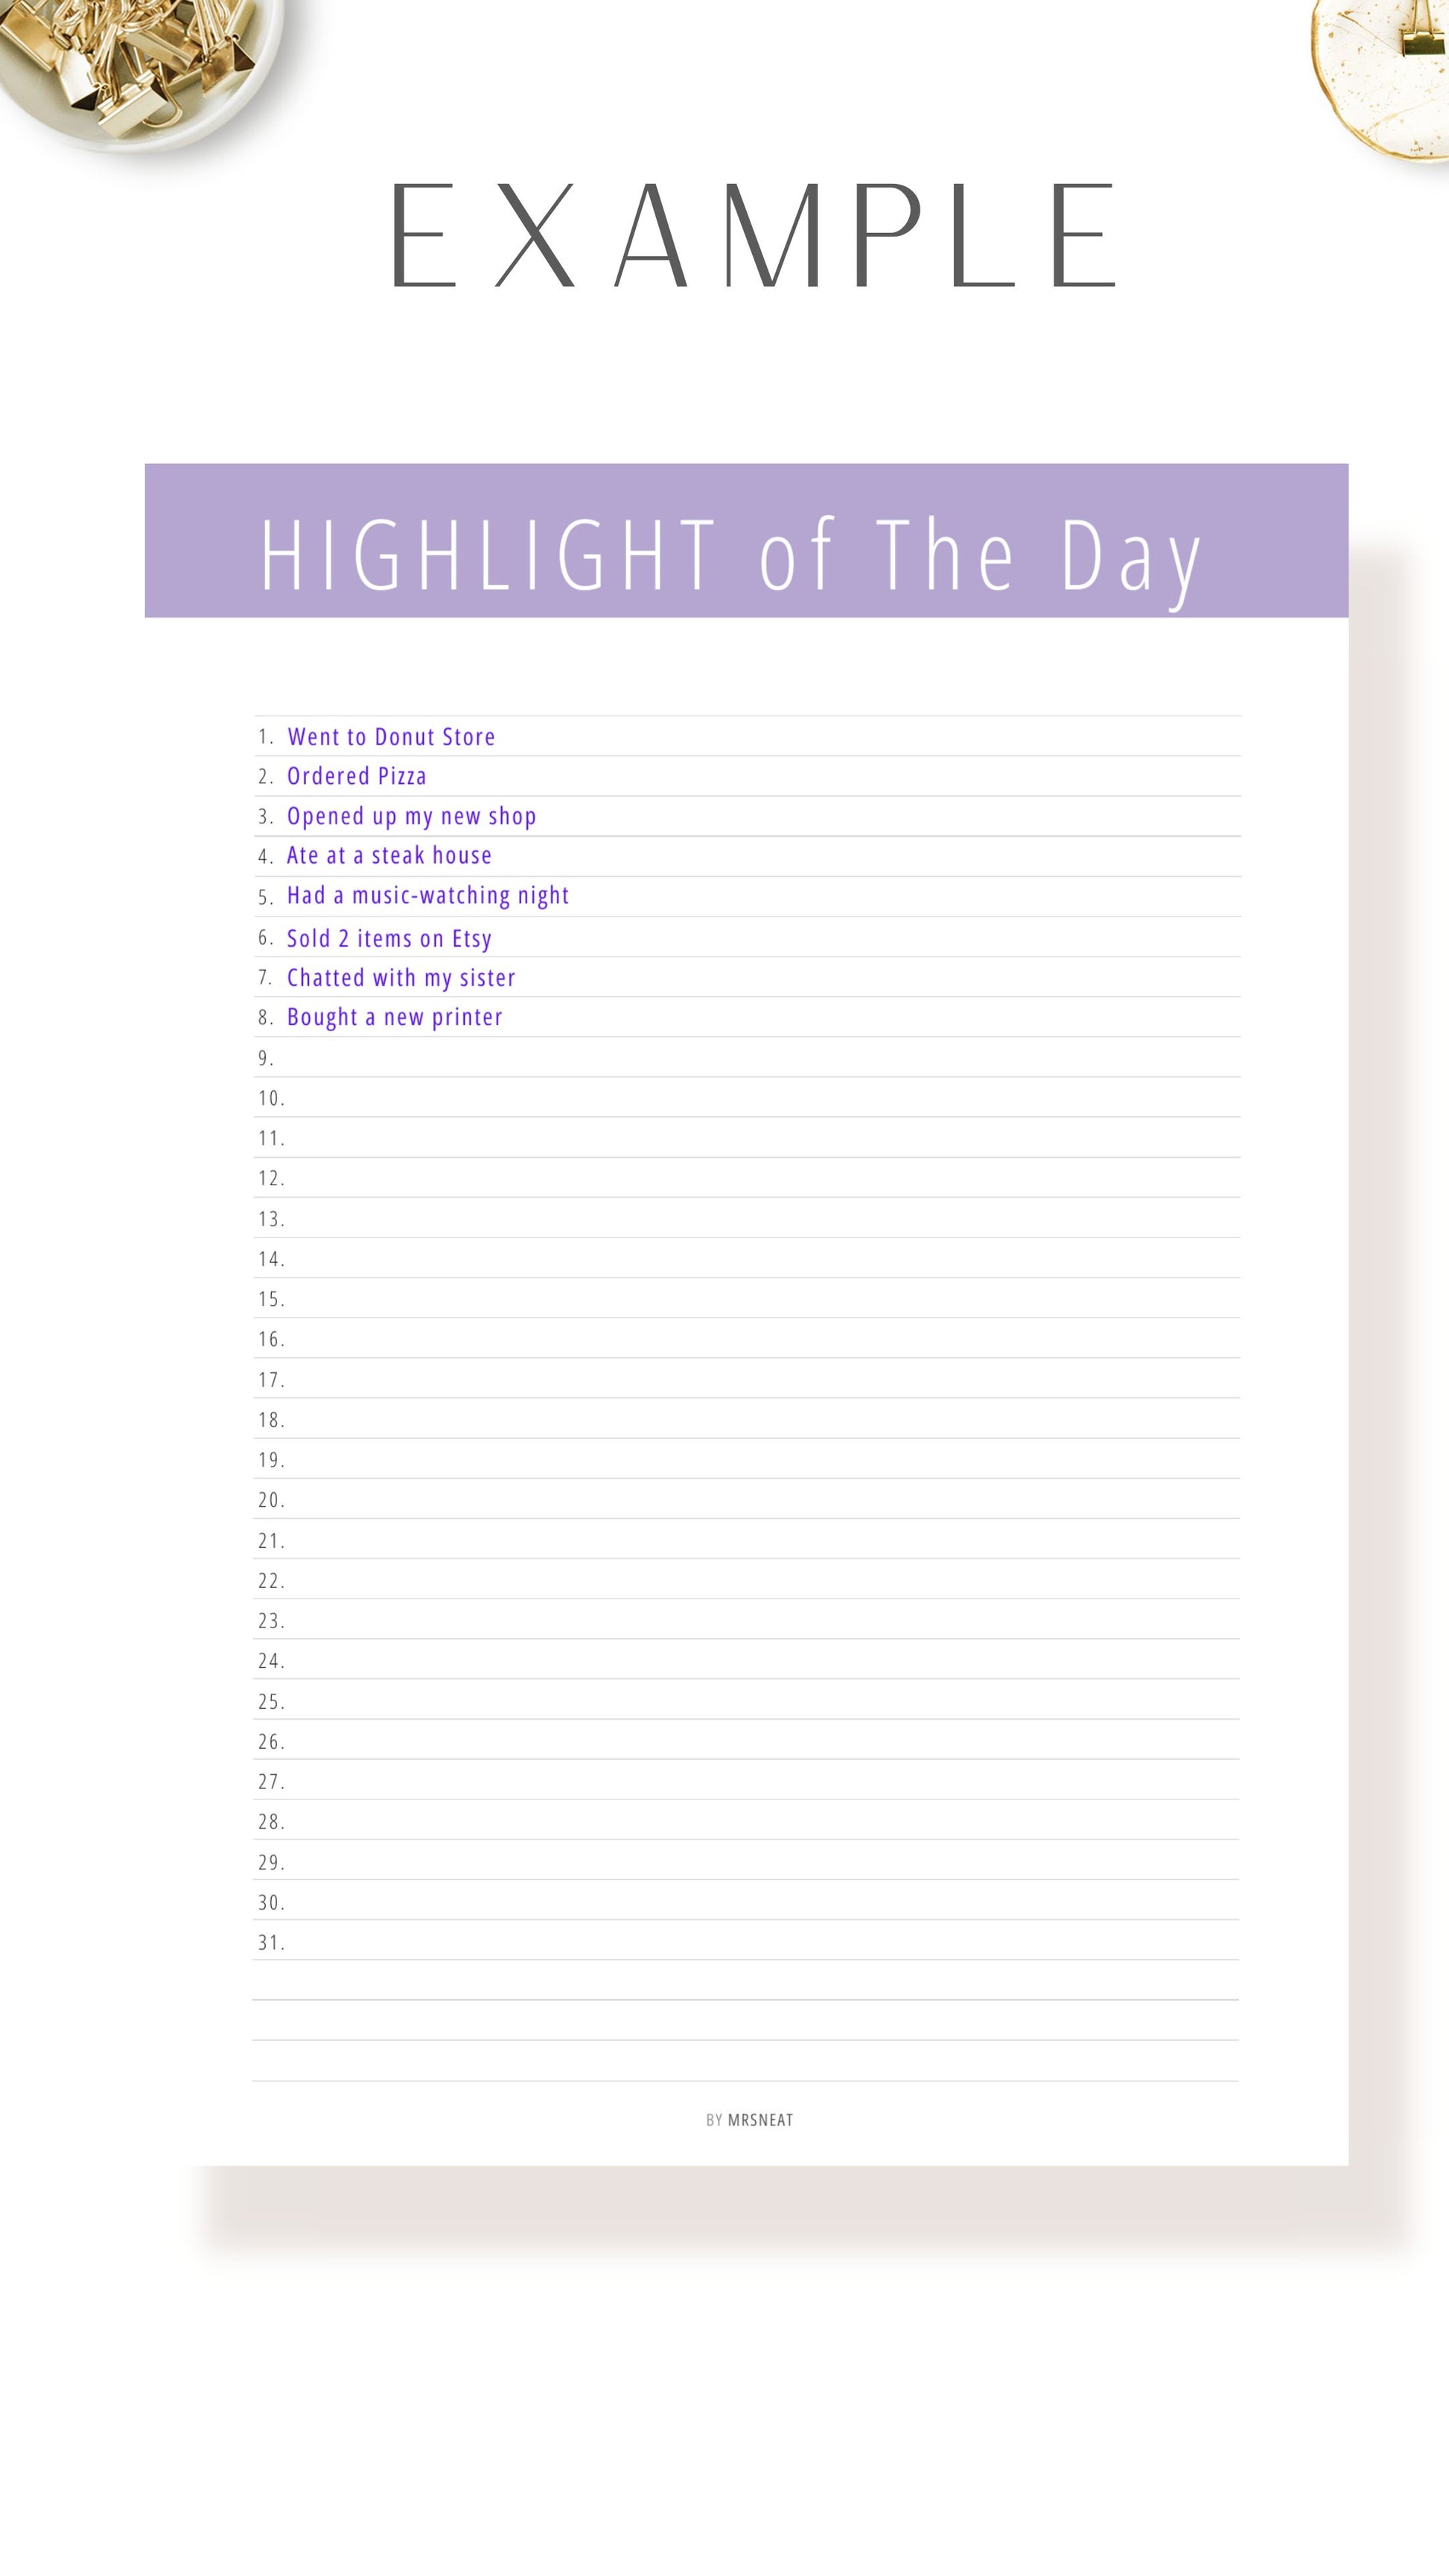 Example of Printable Highlight of The Day Template